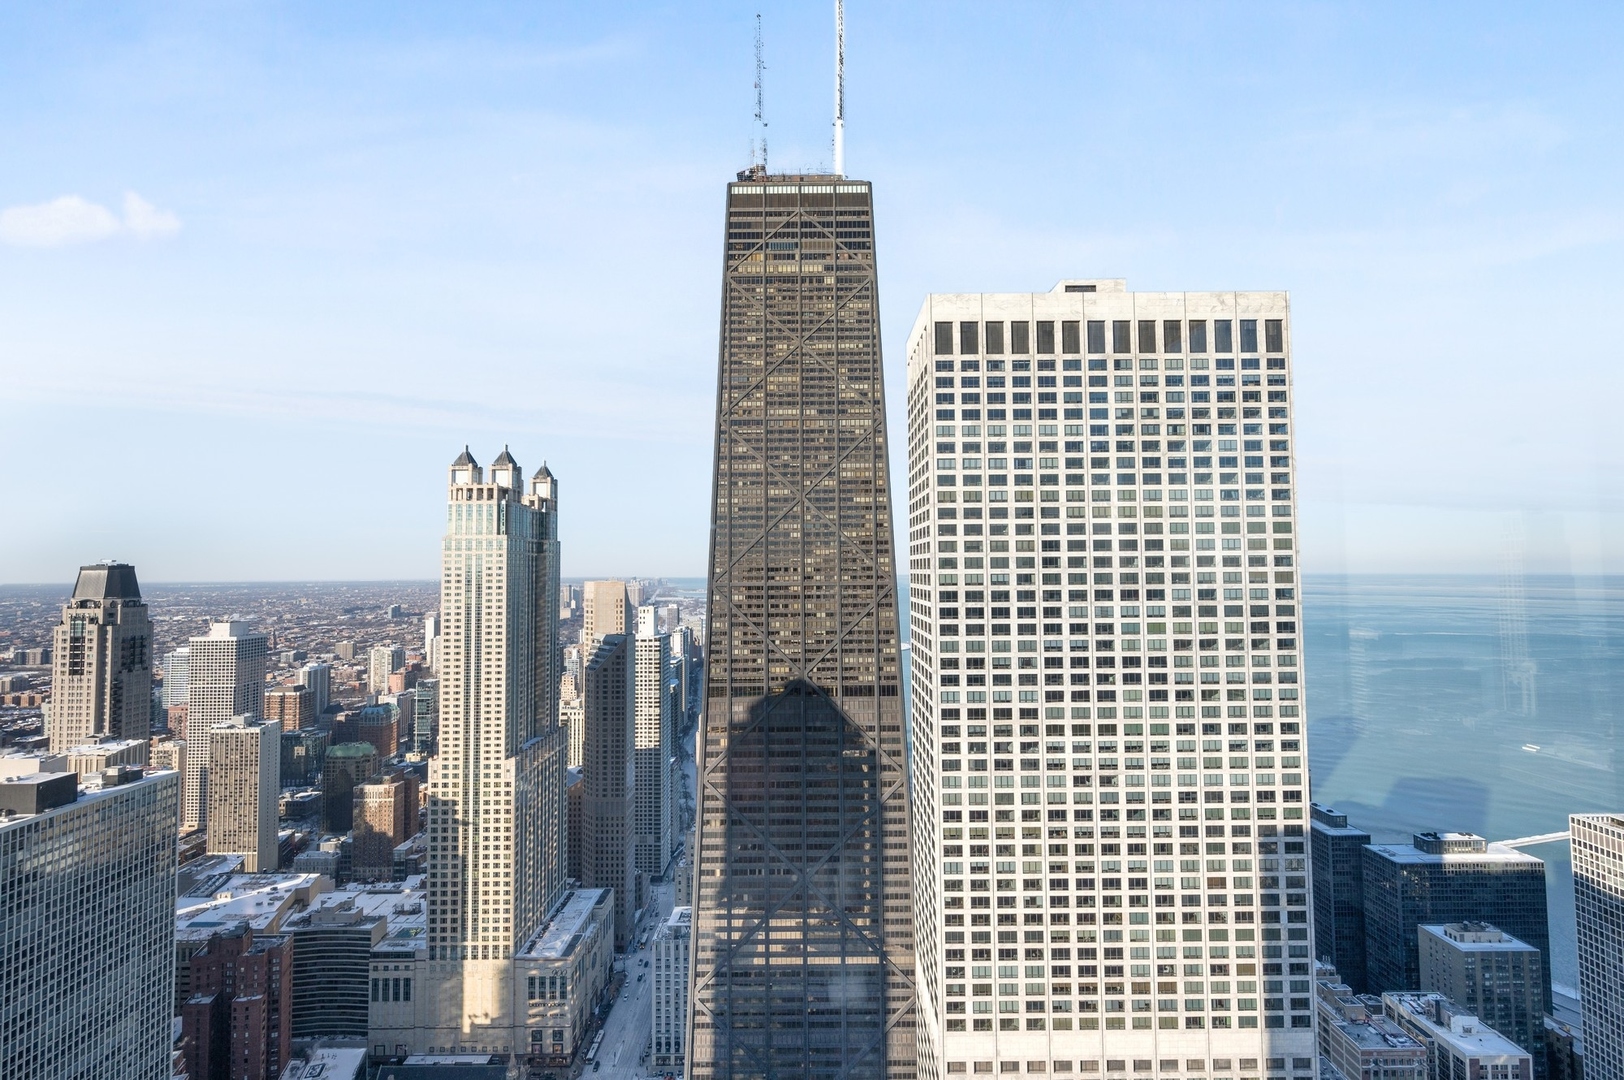 Neiman Marcus building on Chicago's Magnificent Mile sold